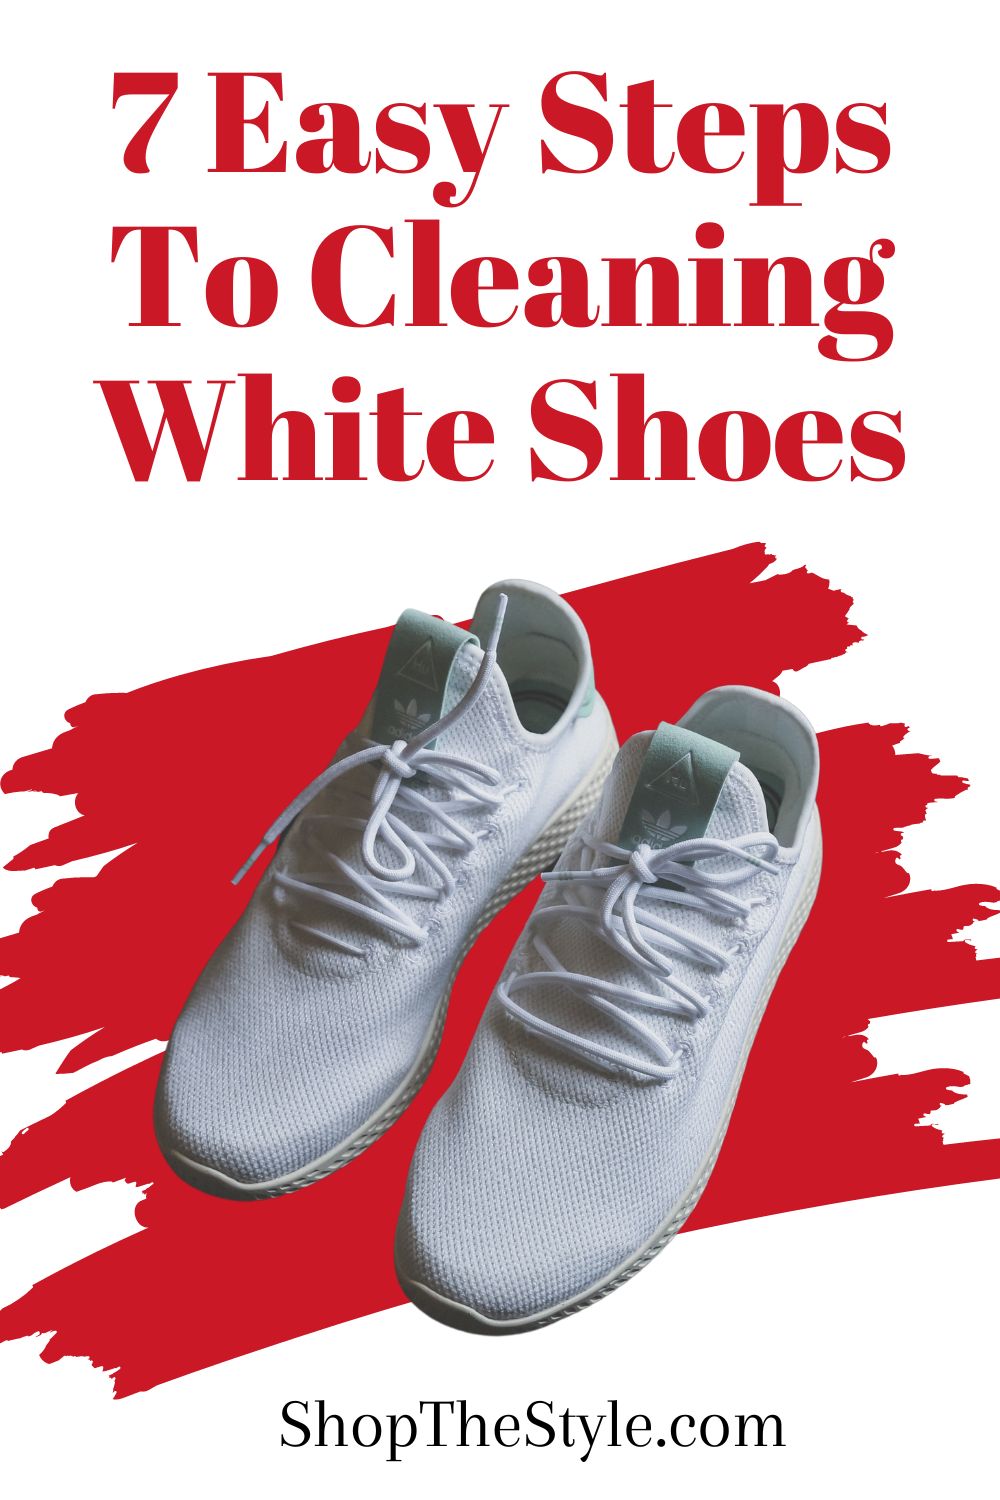 A Sneakerhead’s Guide to Cleaning White Shoes